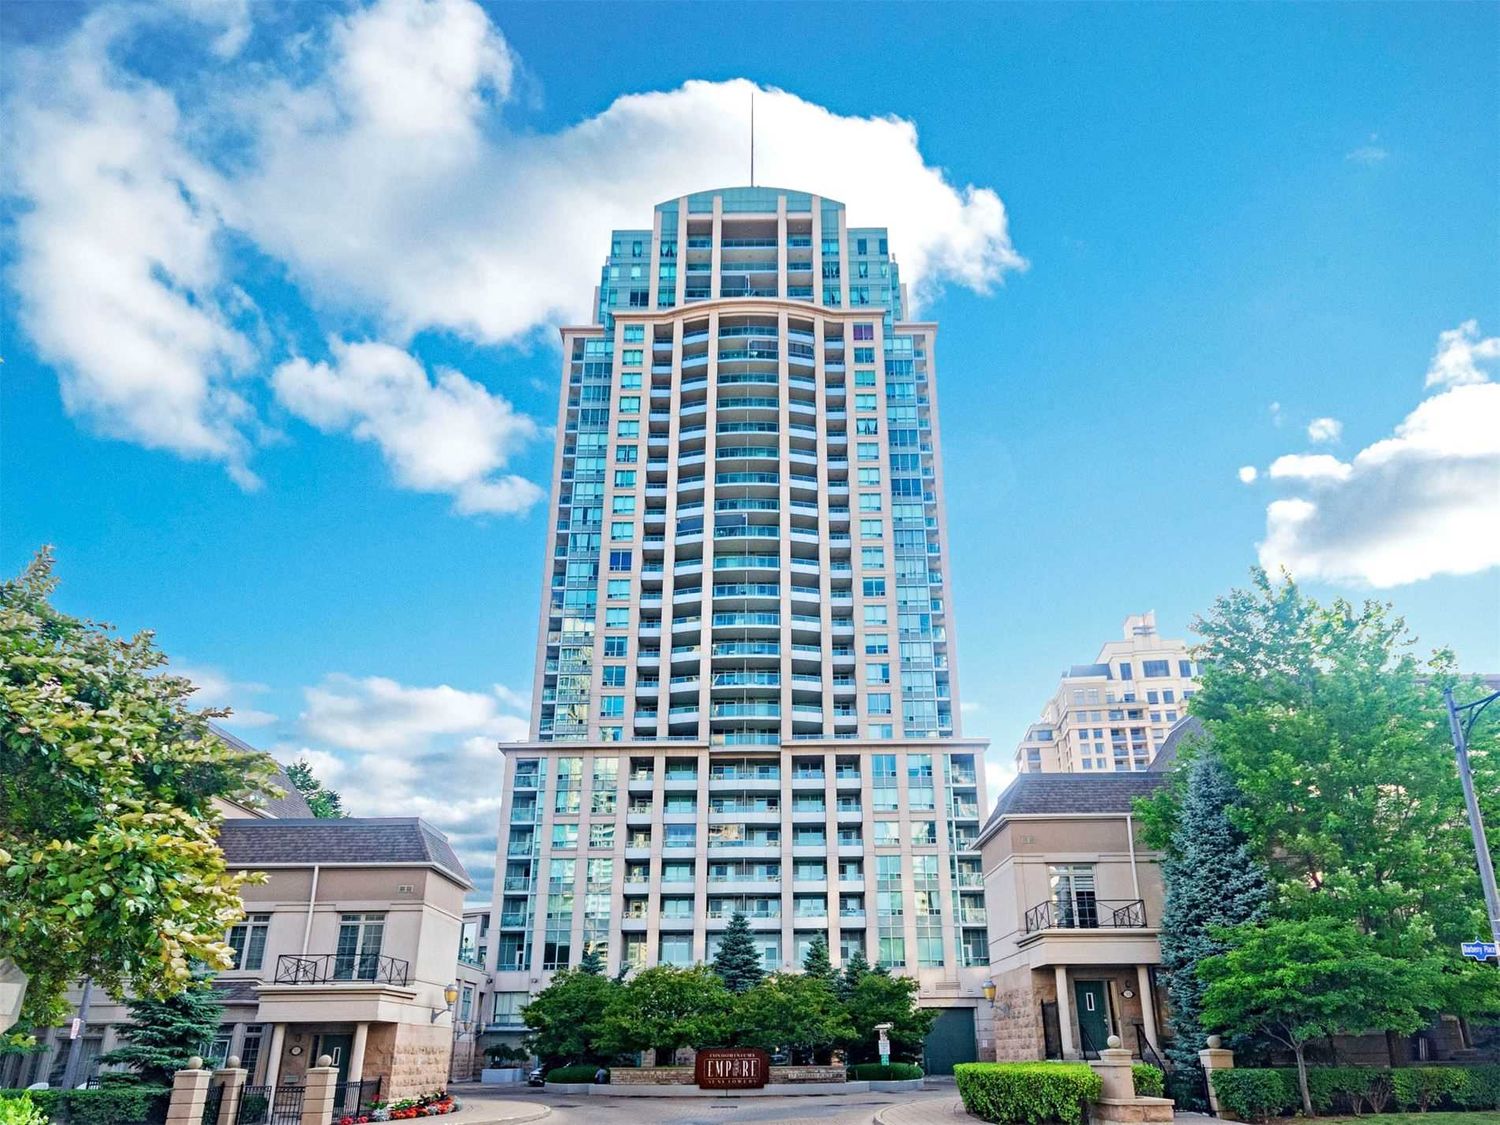 17 Barberry Place. Kenaston Gardens Condos is located in  North York, Toronto - image #1 of 4